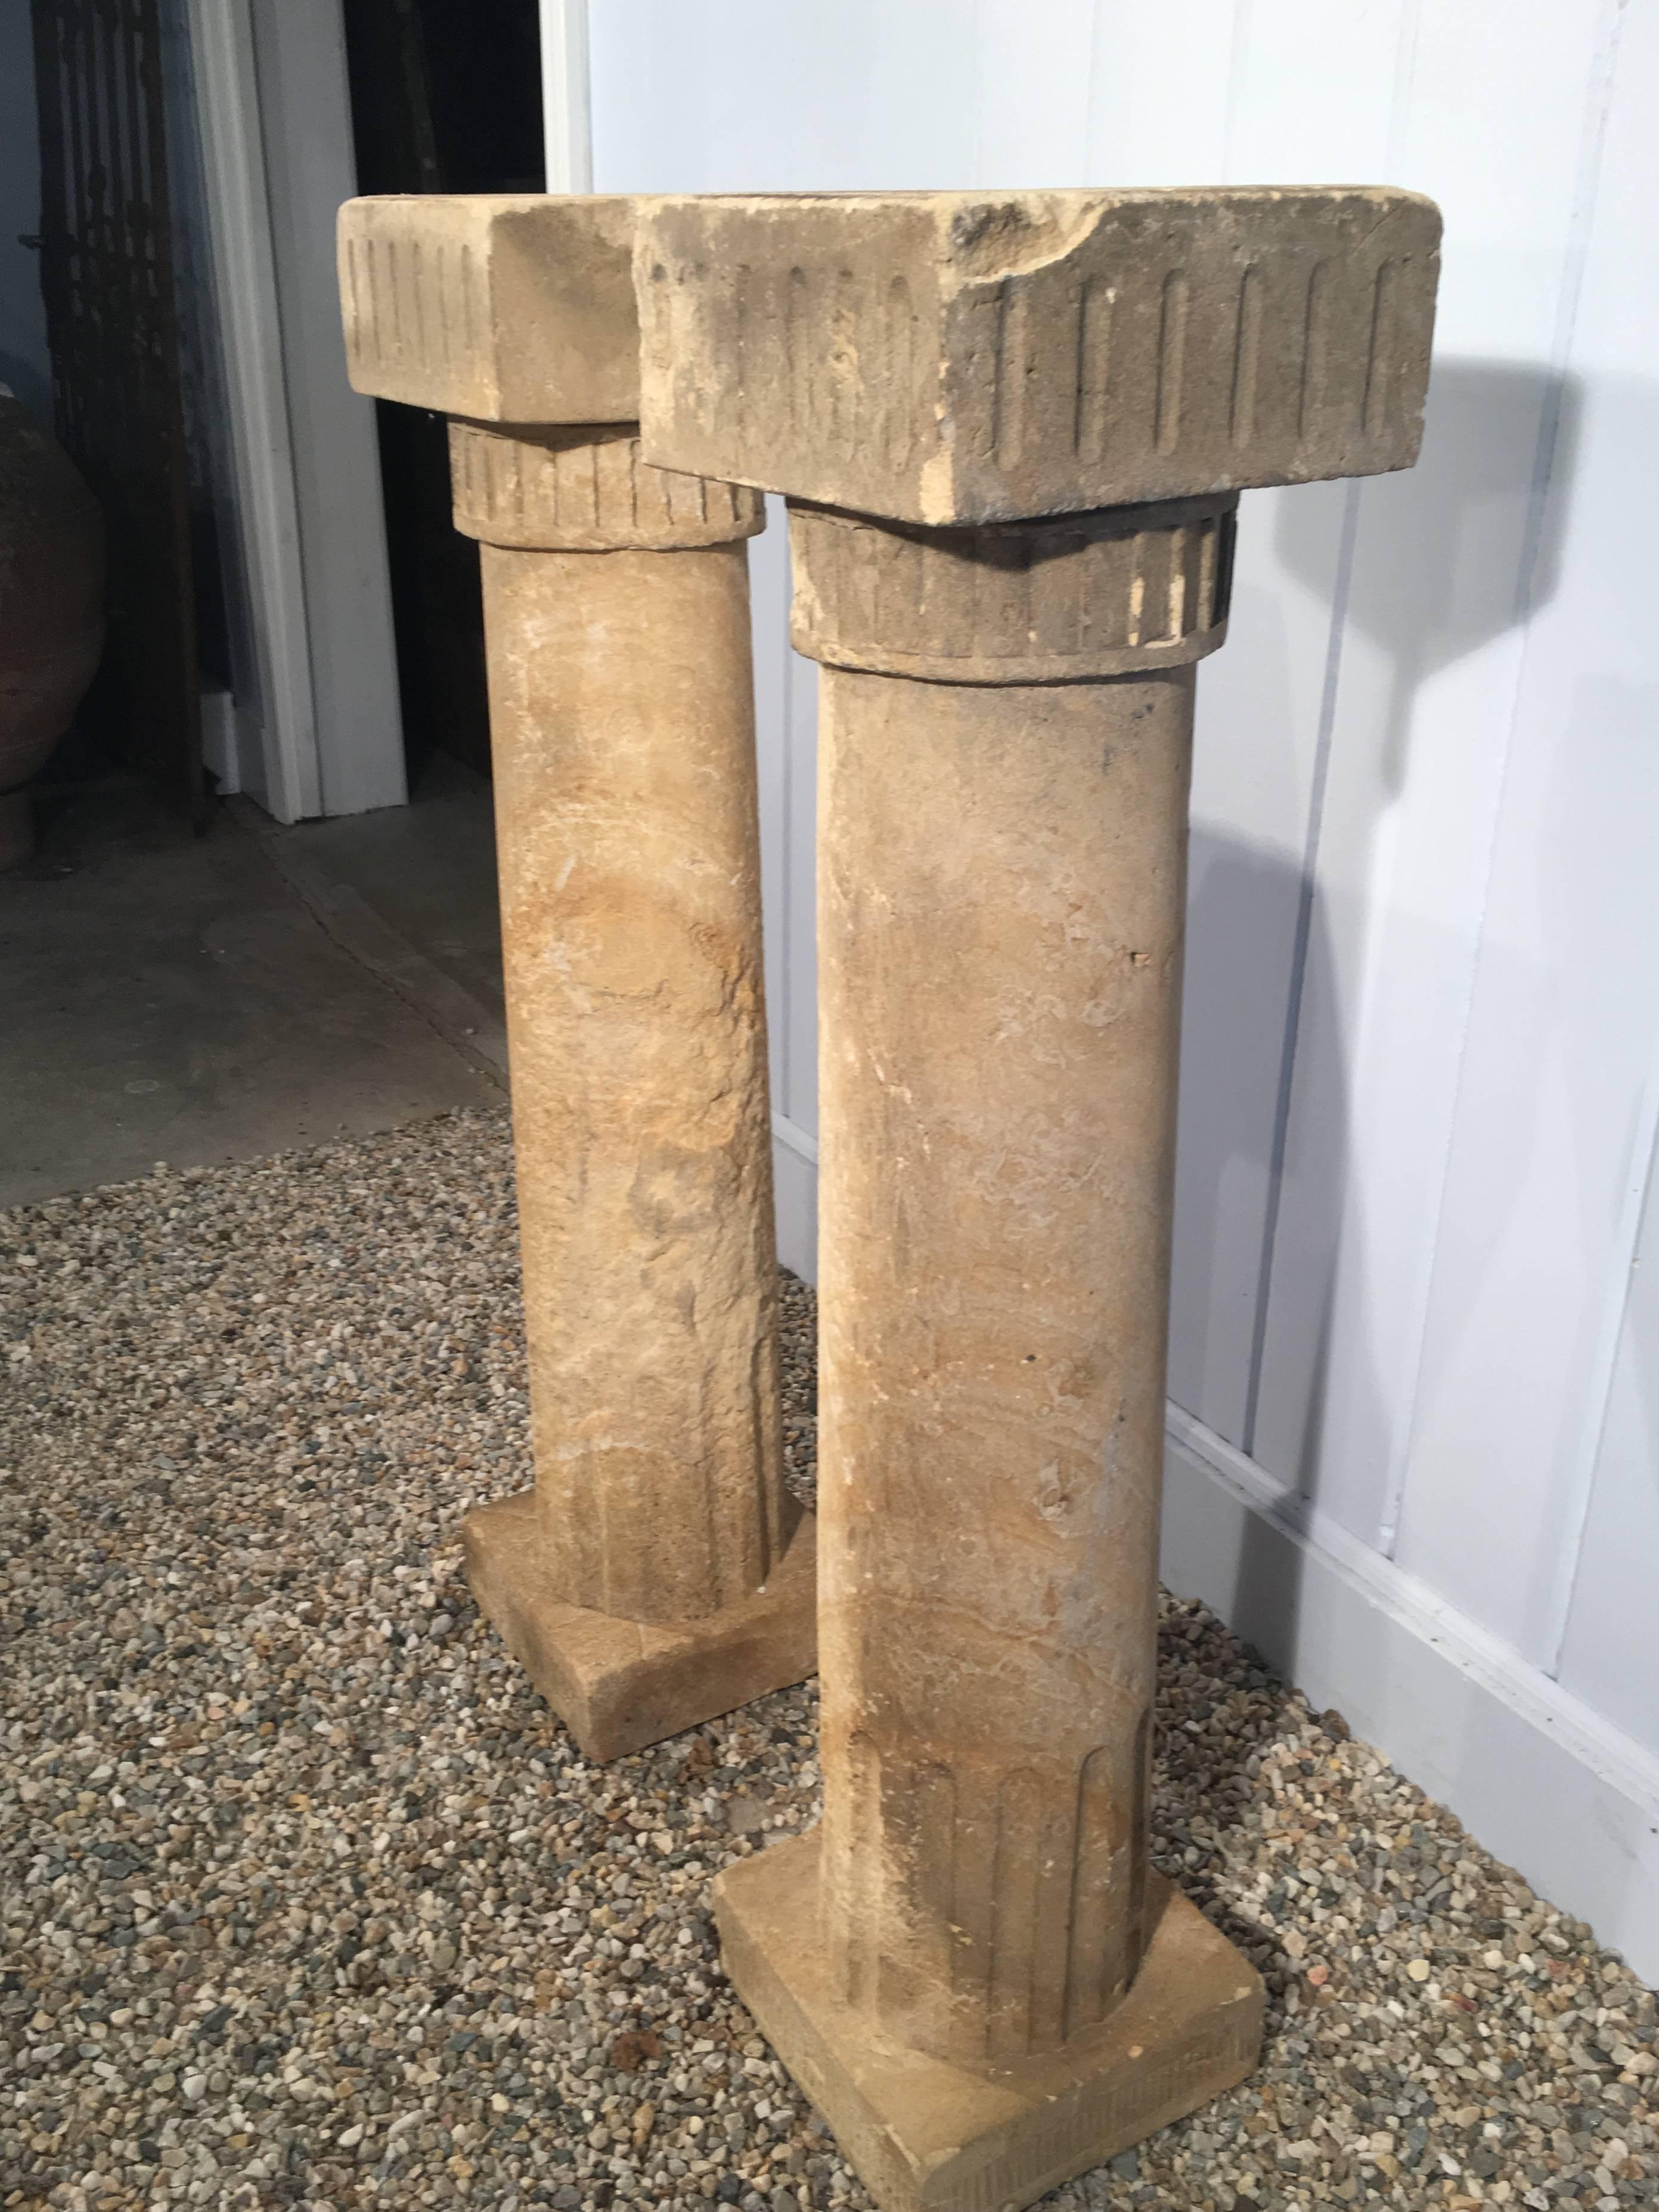 This stunning pair of 18th century hand-carved sandstone columns comes from the area around Marseilles and features classical Moorish-influenced carving on the tops and bottoms. In excellent condition for their age, they work beautifully flanking an